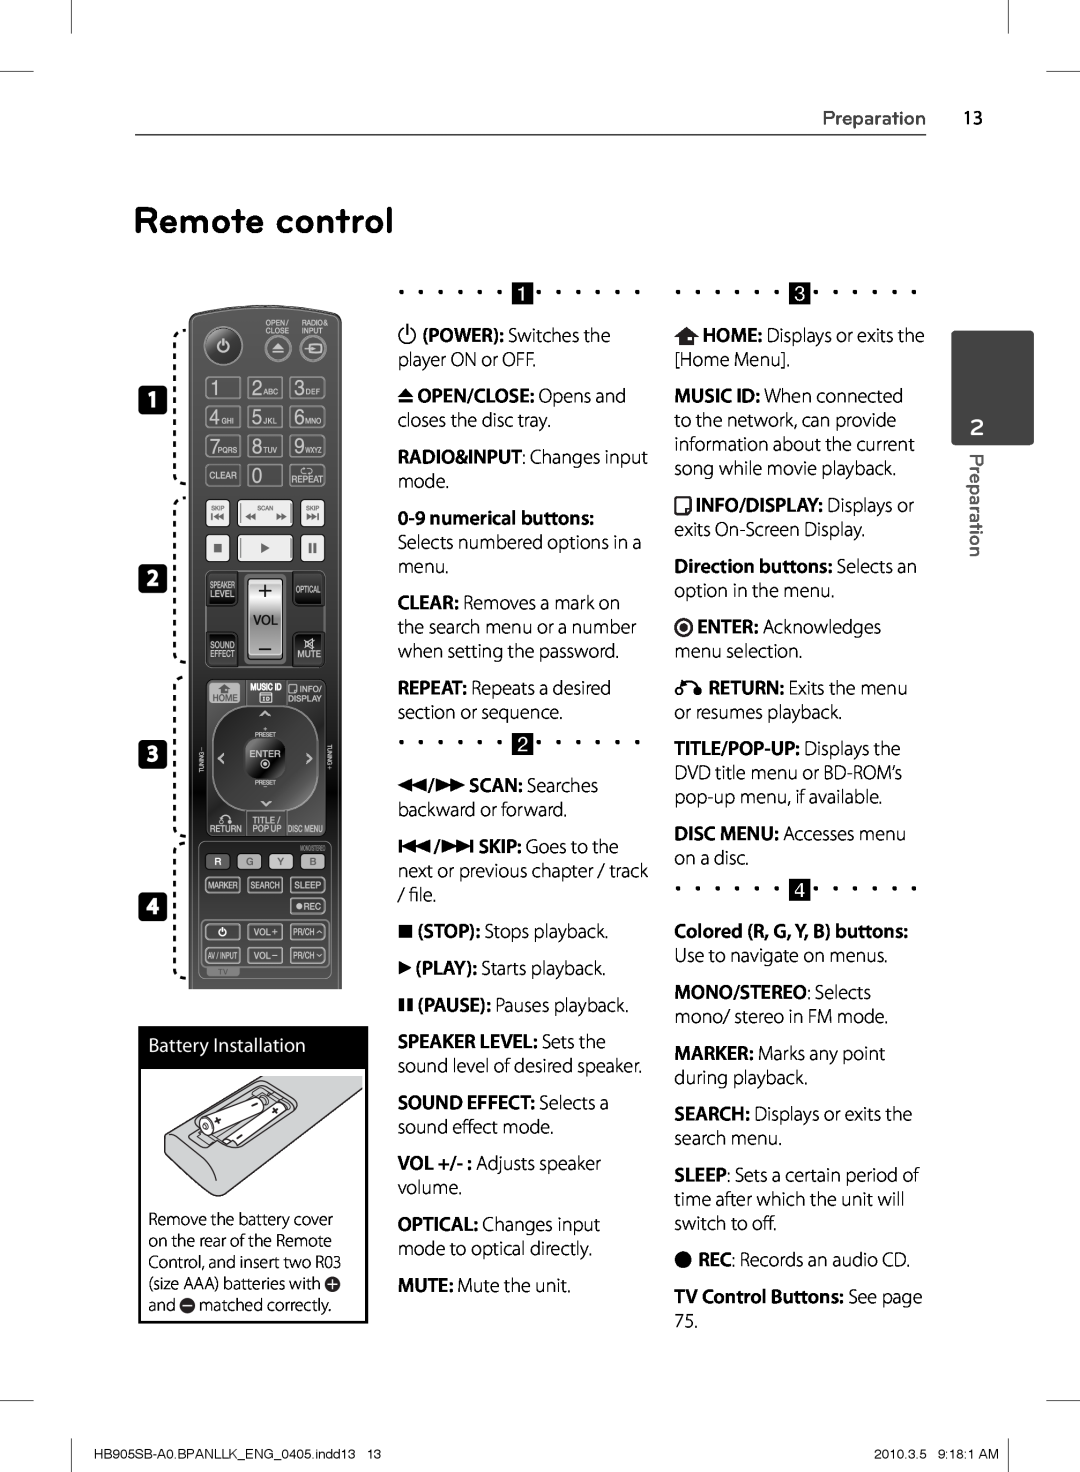 LG Electronics HB905SB owner manual Remote control, Battery Installation, 1POWER Switches the player ON or OFF, Preparation 